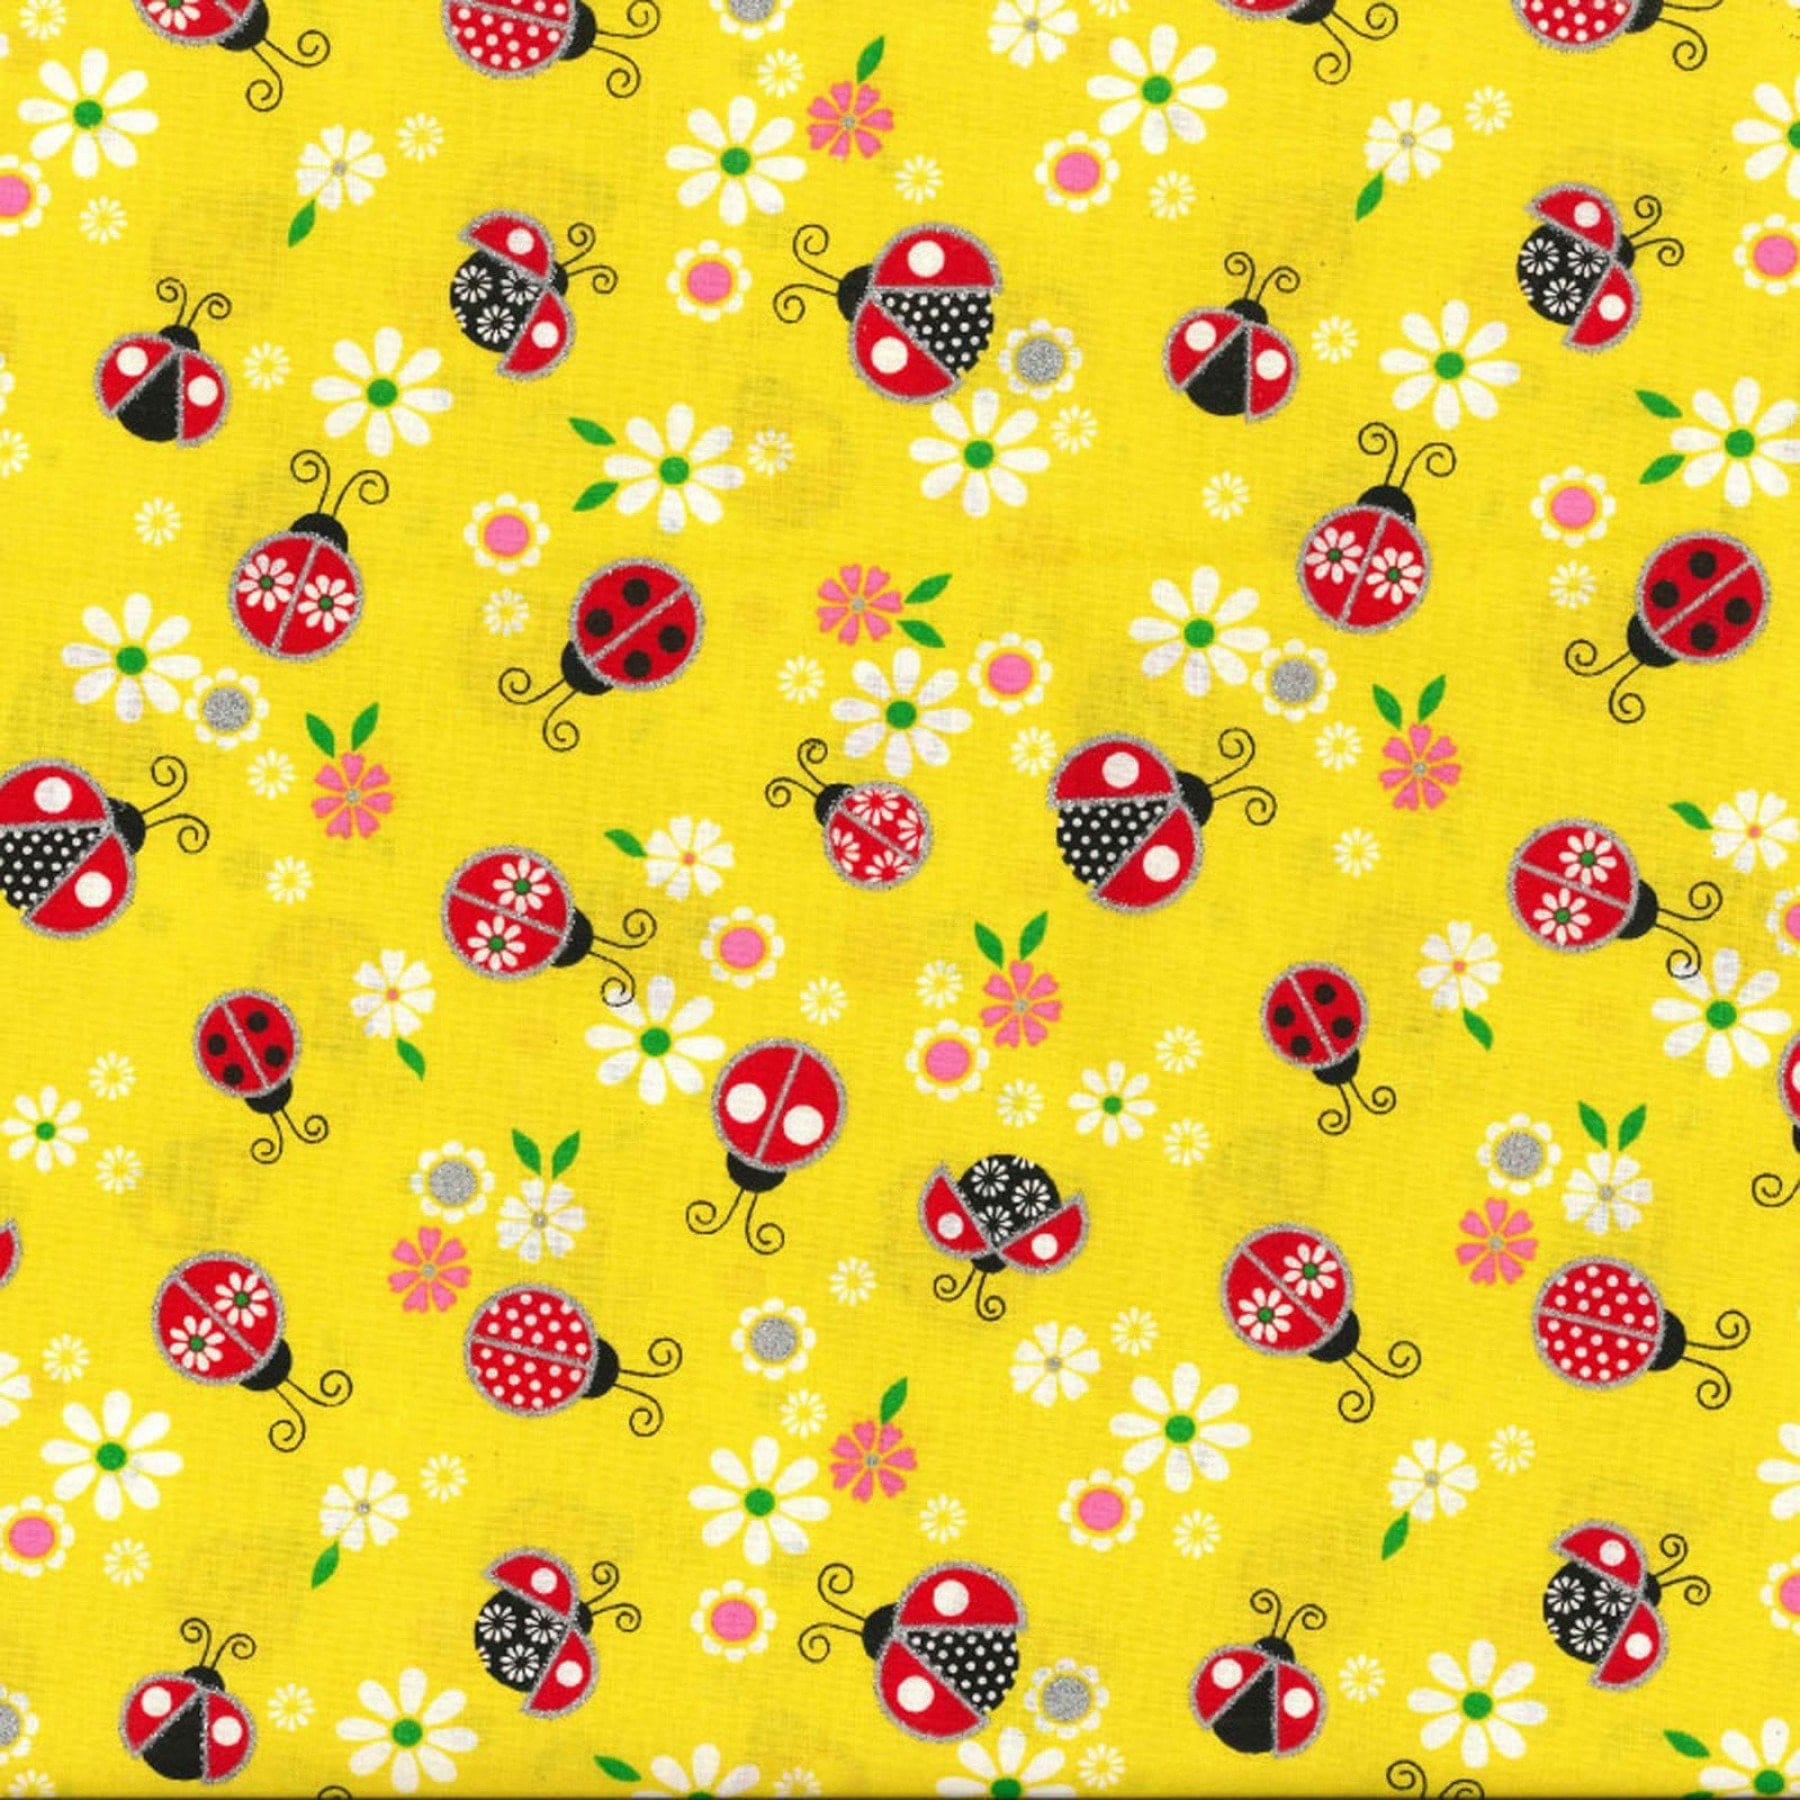 Darling Ladybug Floral print by Fabric Traditions continuous cuts of Quilter&#39;s Cotton Fabric bright yellow, red, white, and black